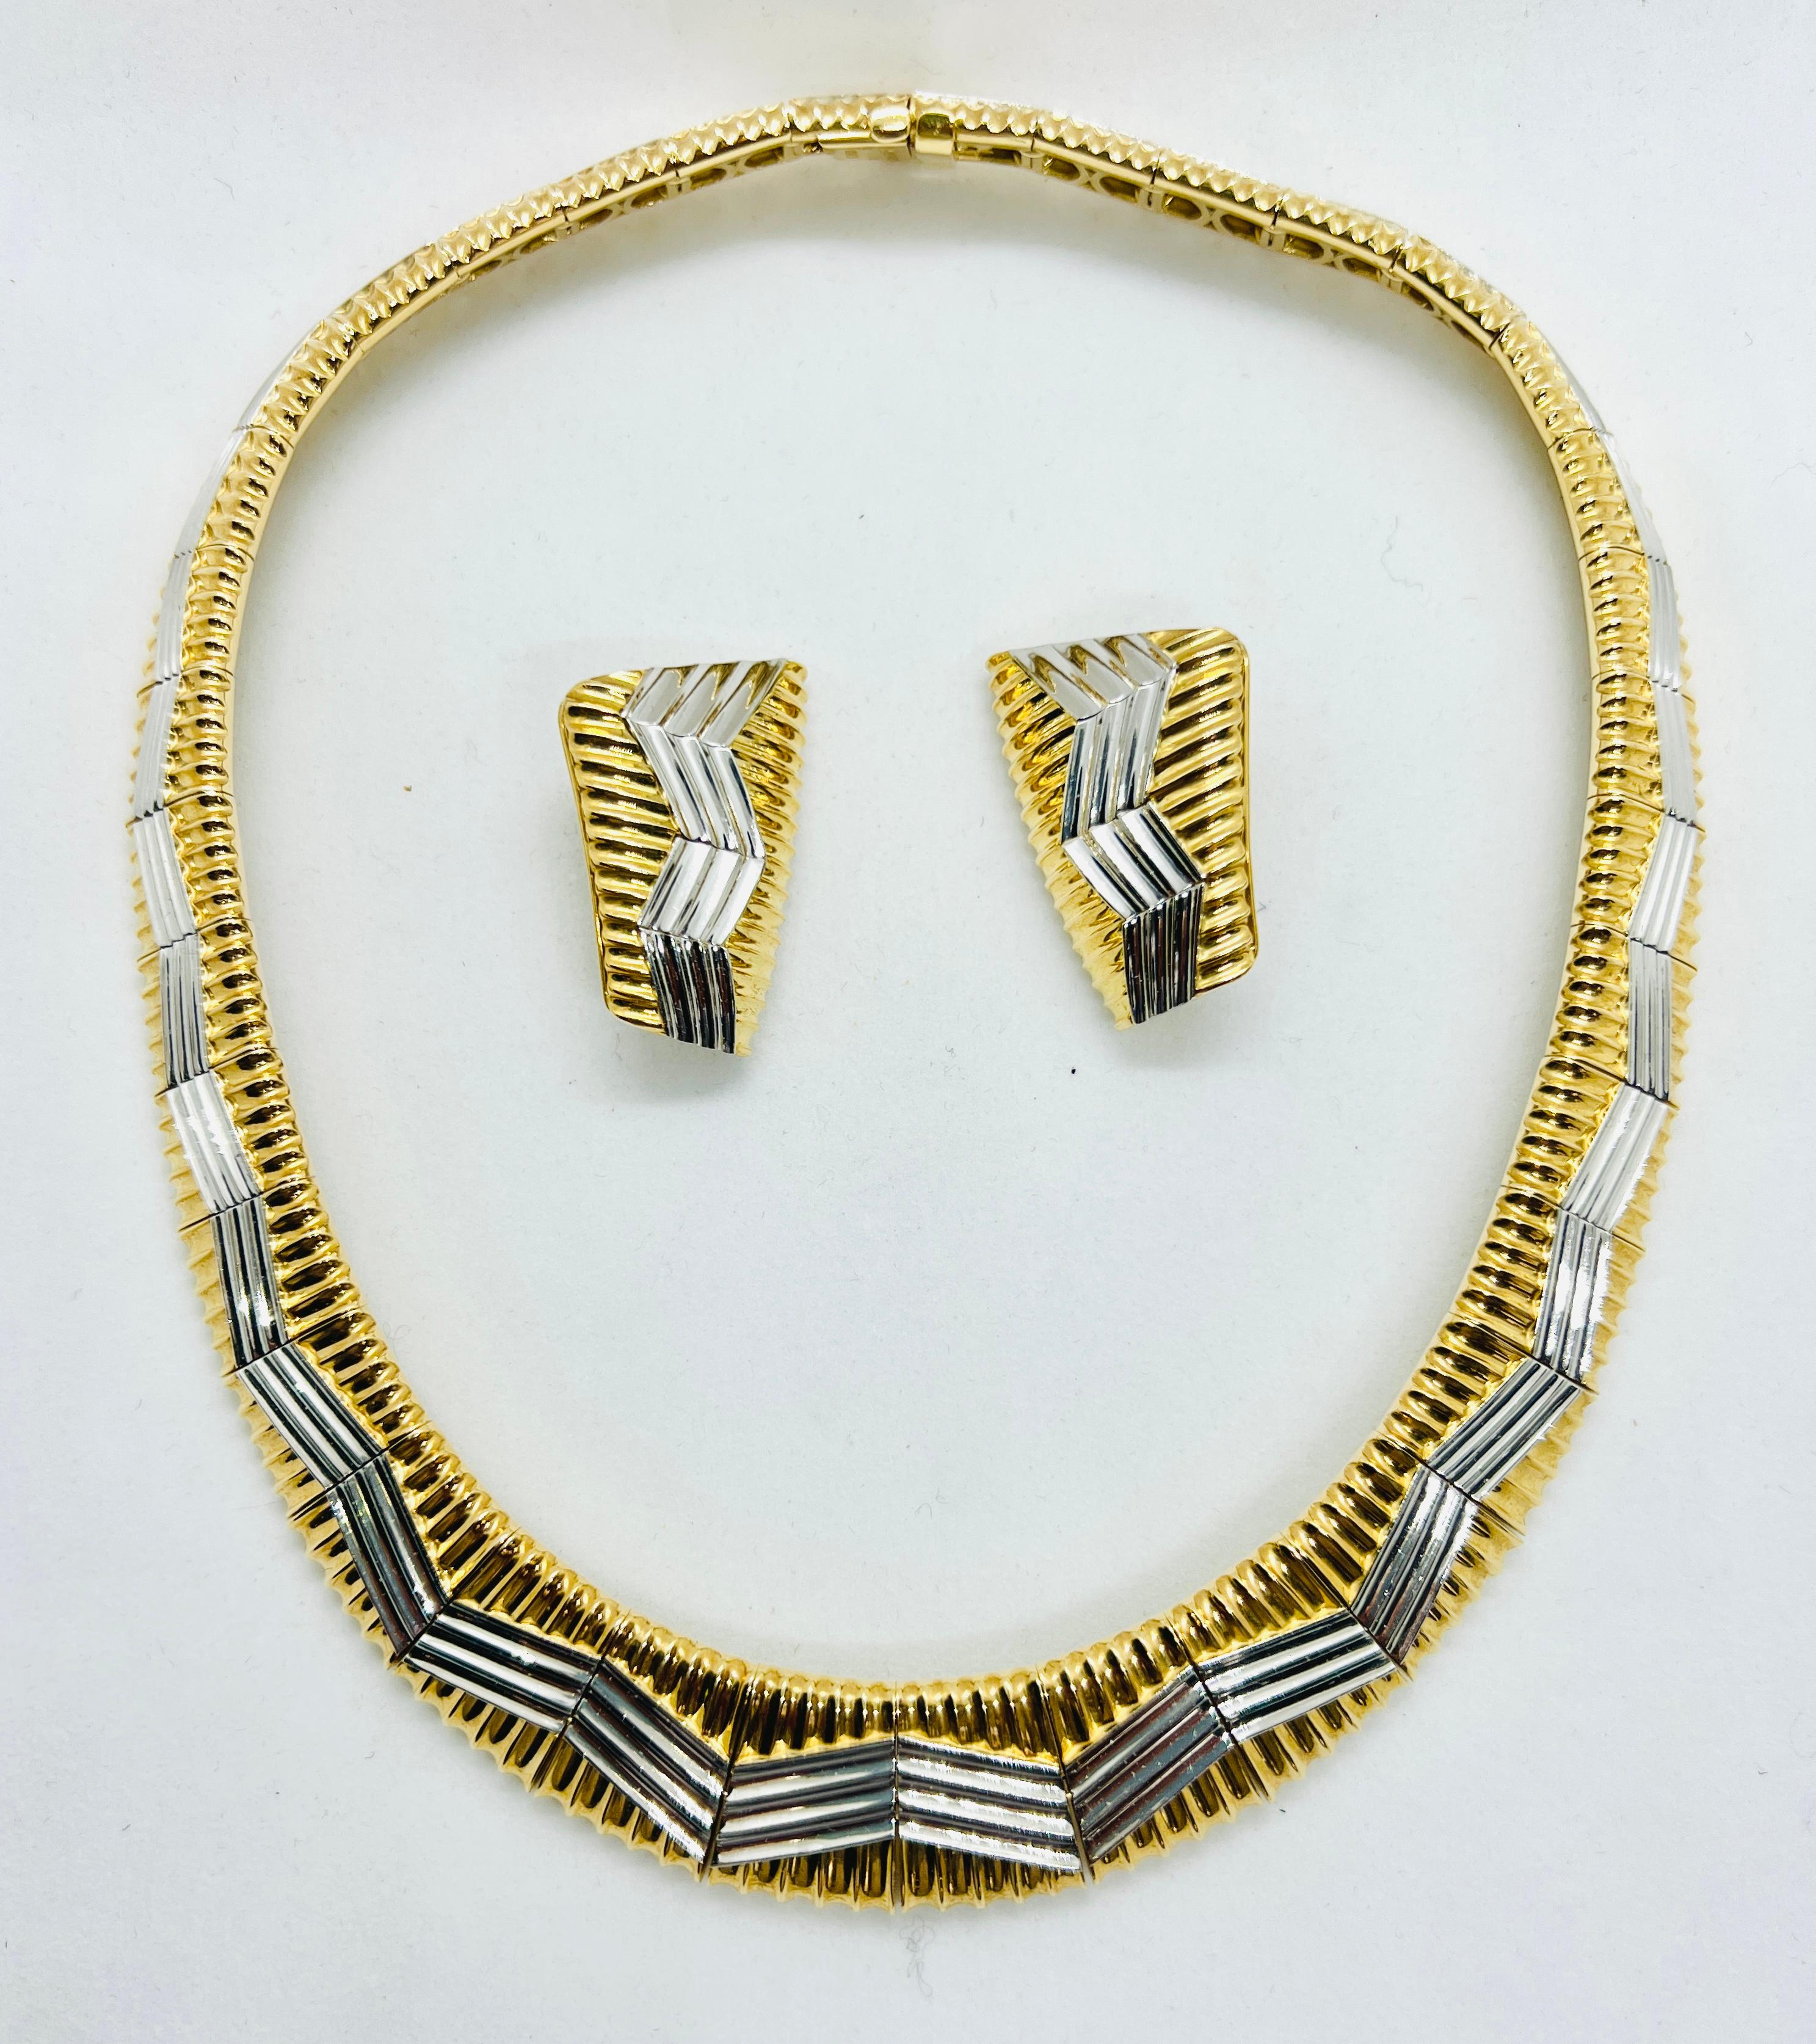 Absolutely Stunning Michael Bondanza 18Kt Yellow Gold and Platinum Necklace and Earrings Suite! The necklace is 3/4 inches at its widest and the earrings measure 1.25 inches by 1 inch. The set weighs 224.5 grams. Please read below directly from the